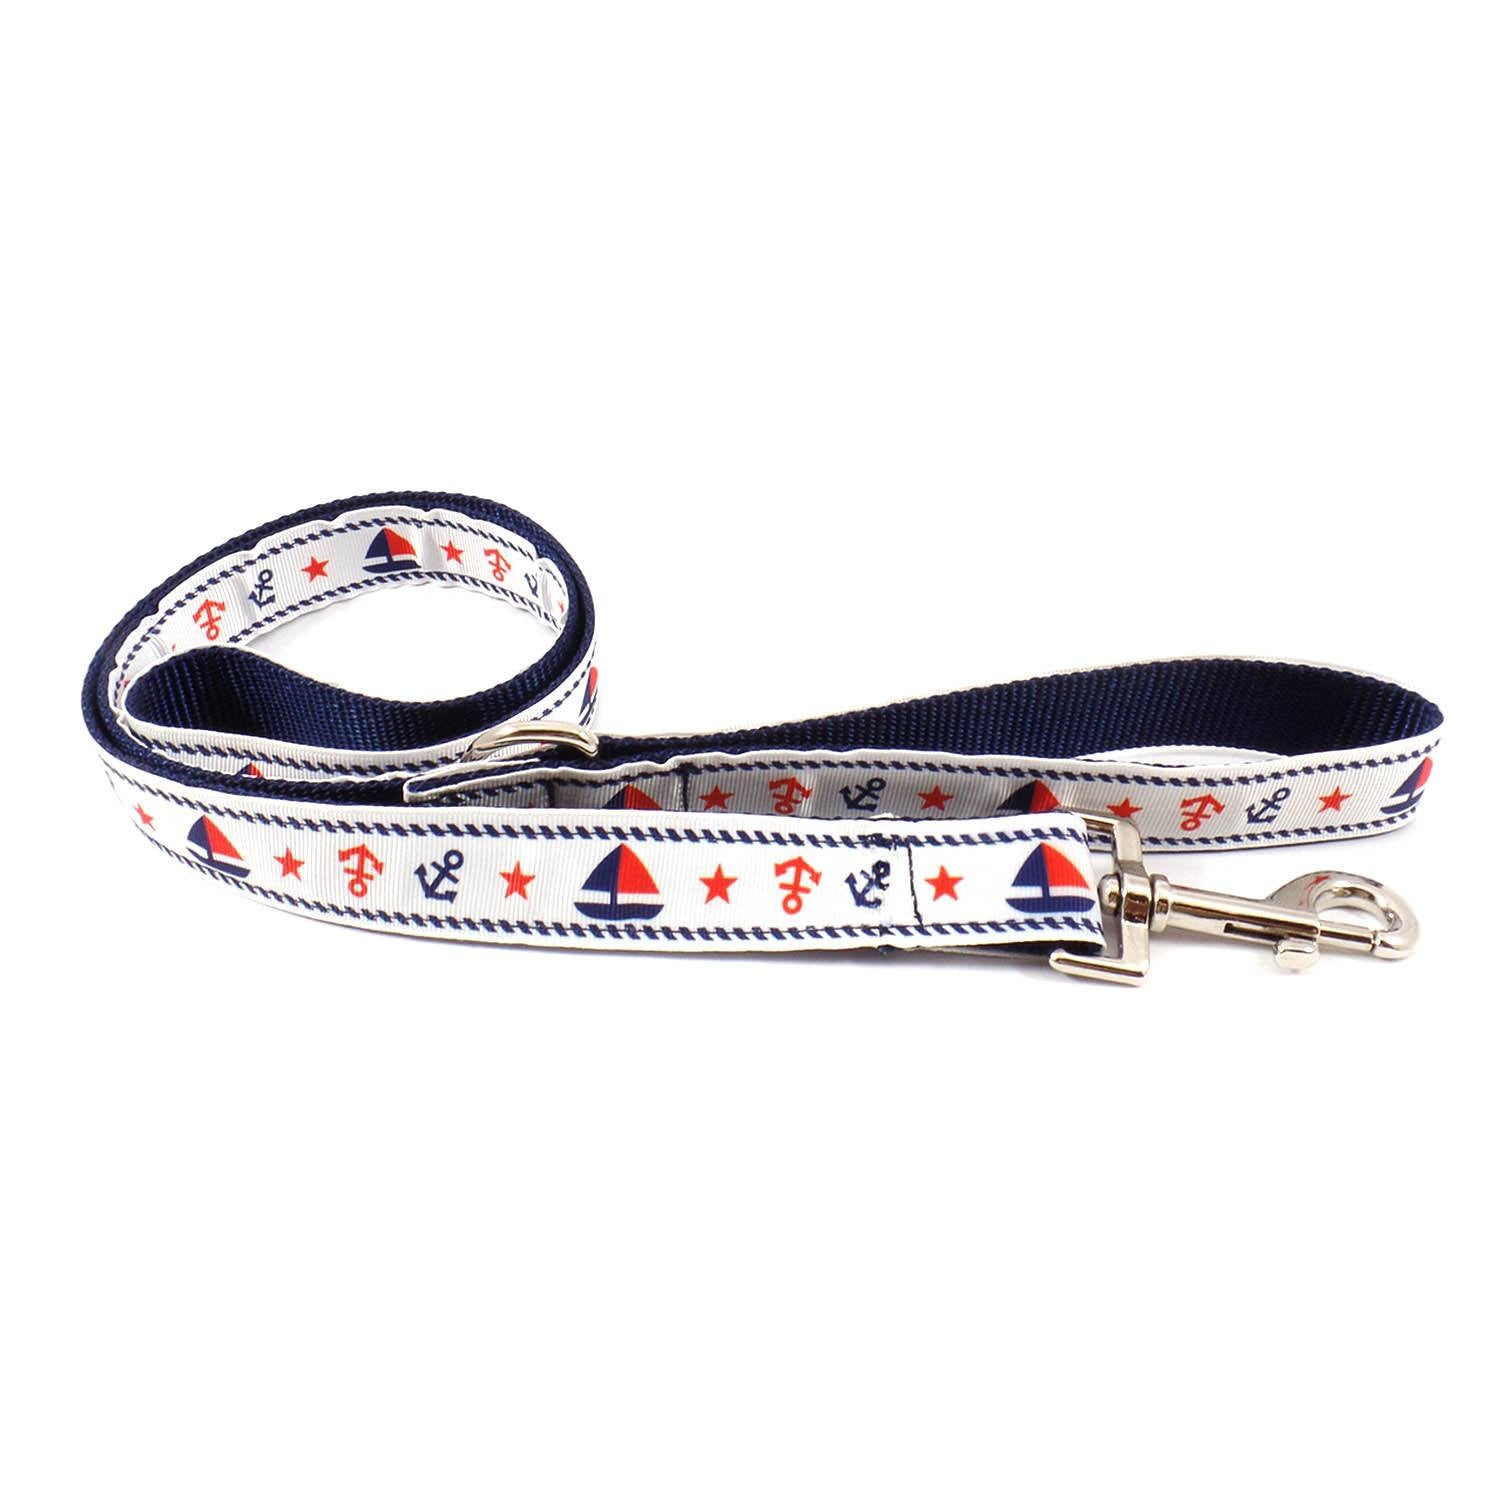 White with Boats and Anchors Leash - Beach & Dog Co.